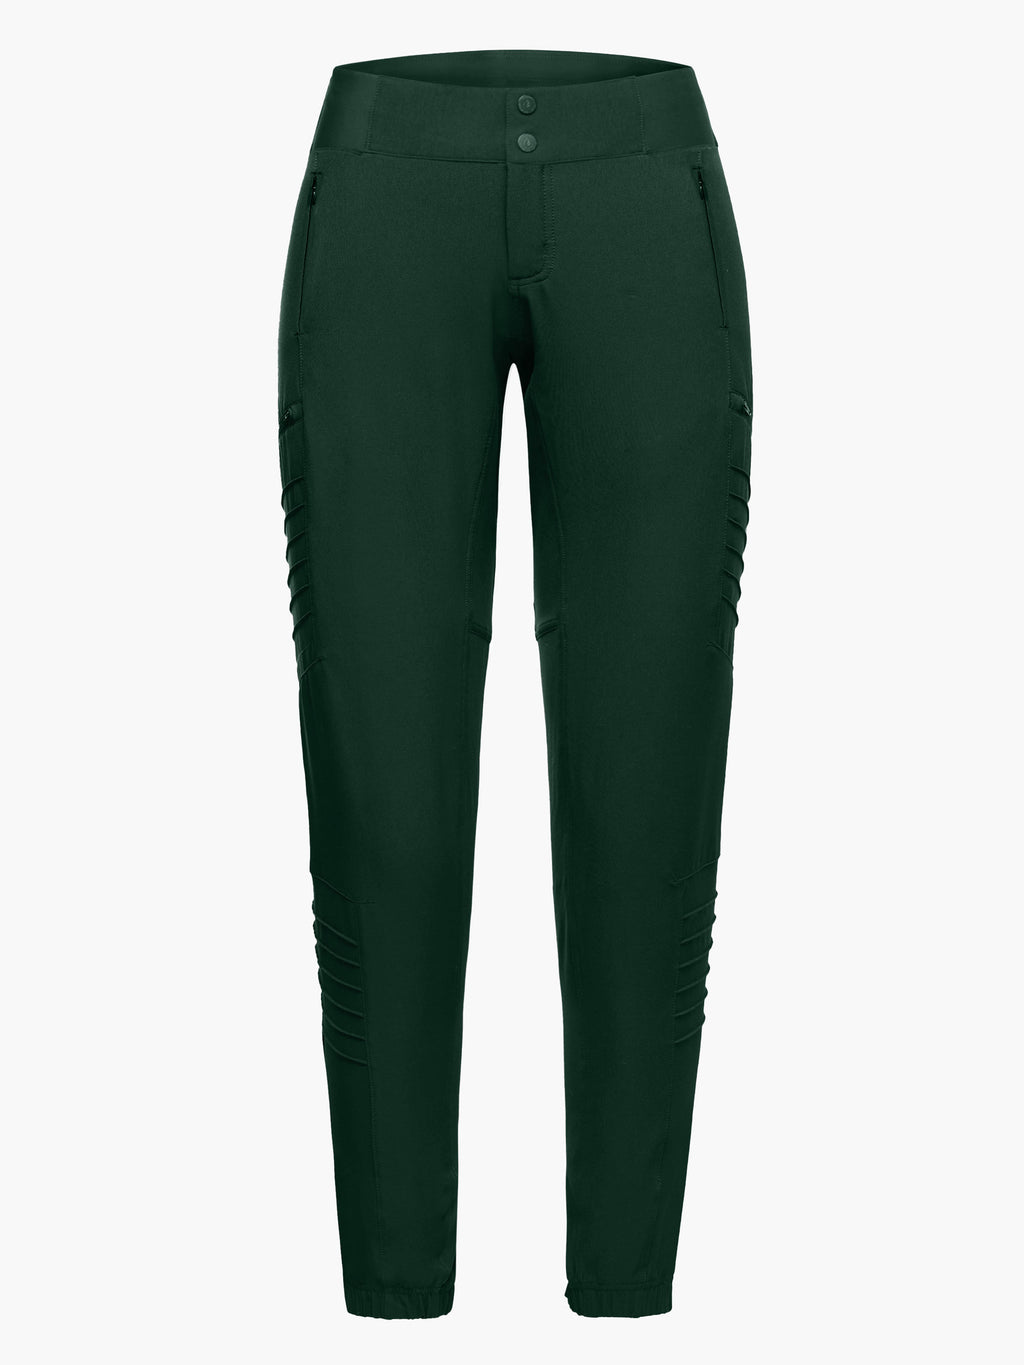 SHREDLY - All Time - Zipper Snap Mid-Rise Pant : Pine - image